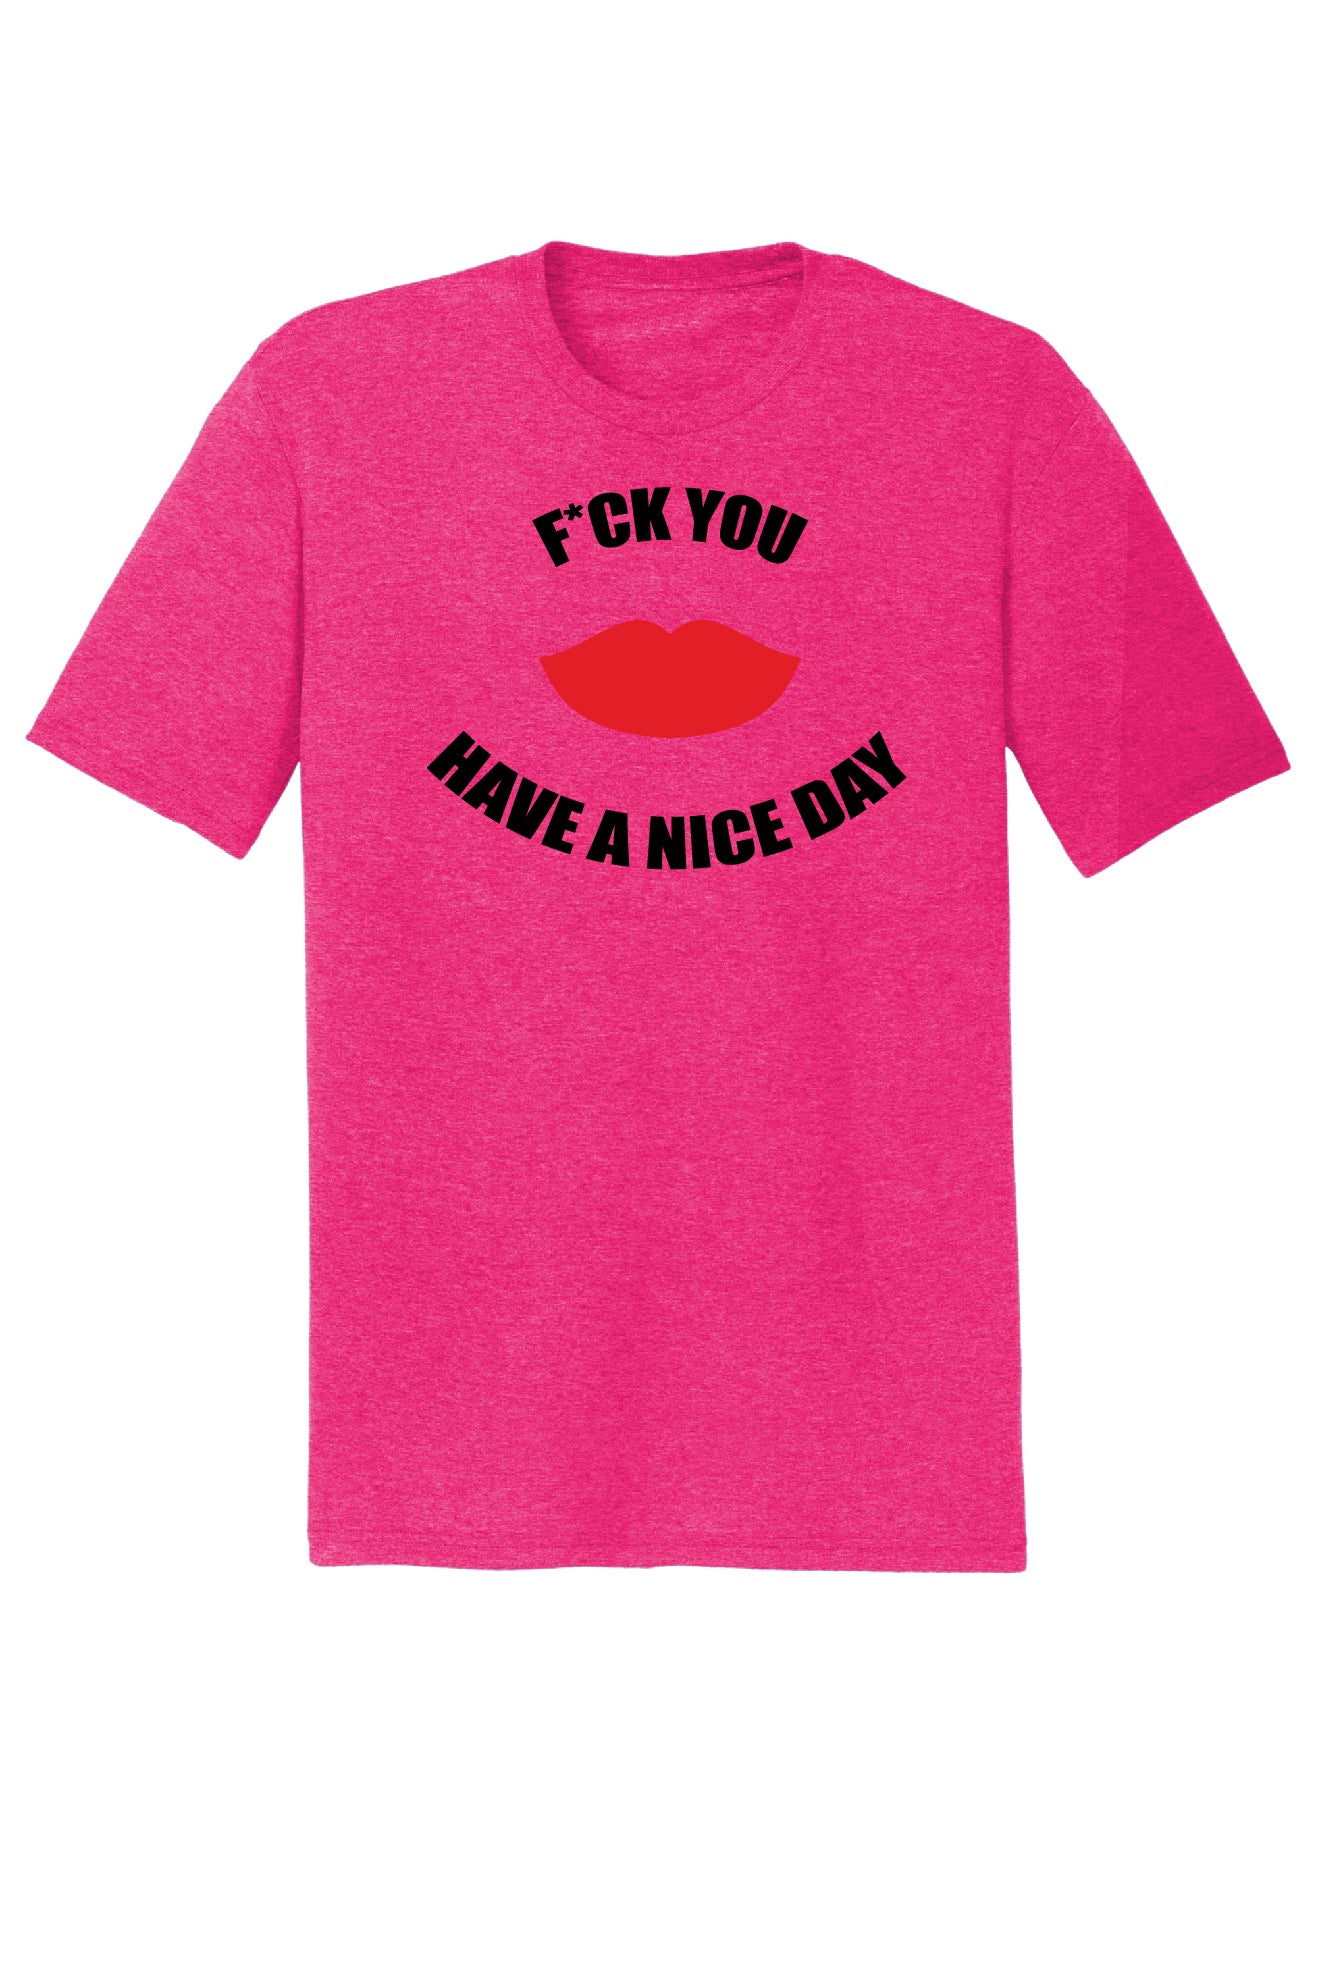 F*CK YOU, Have a Nice Day, Lips Tee